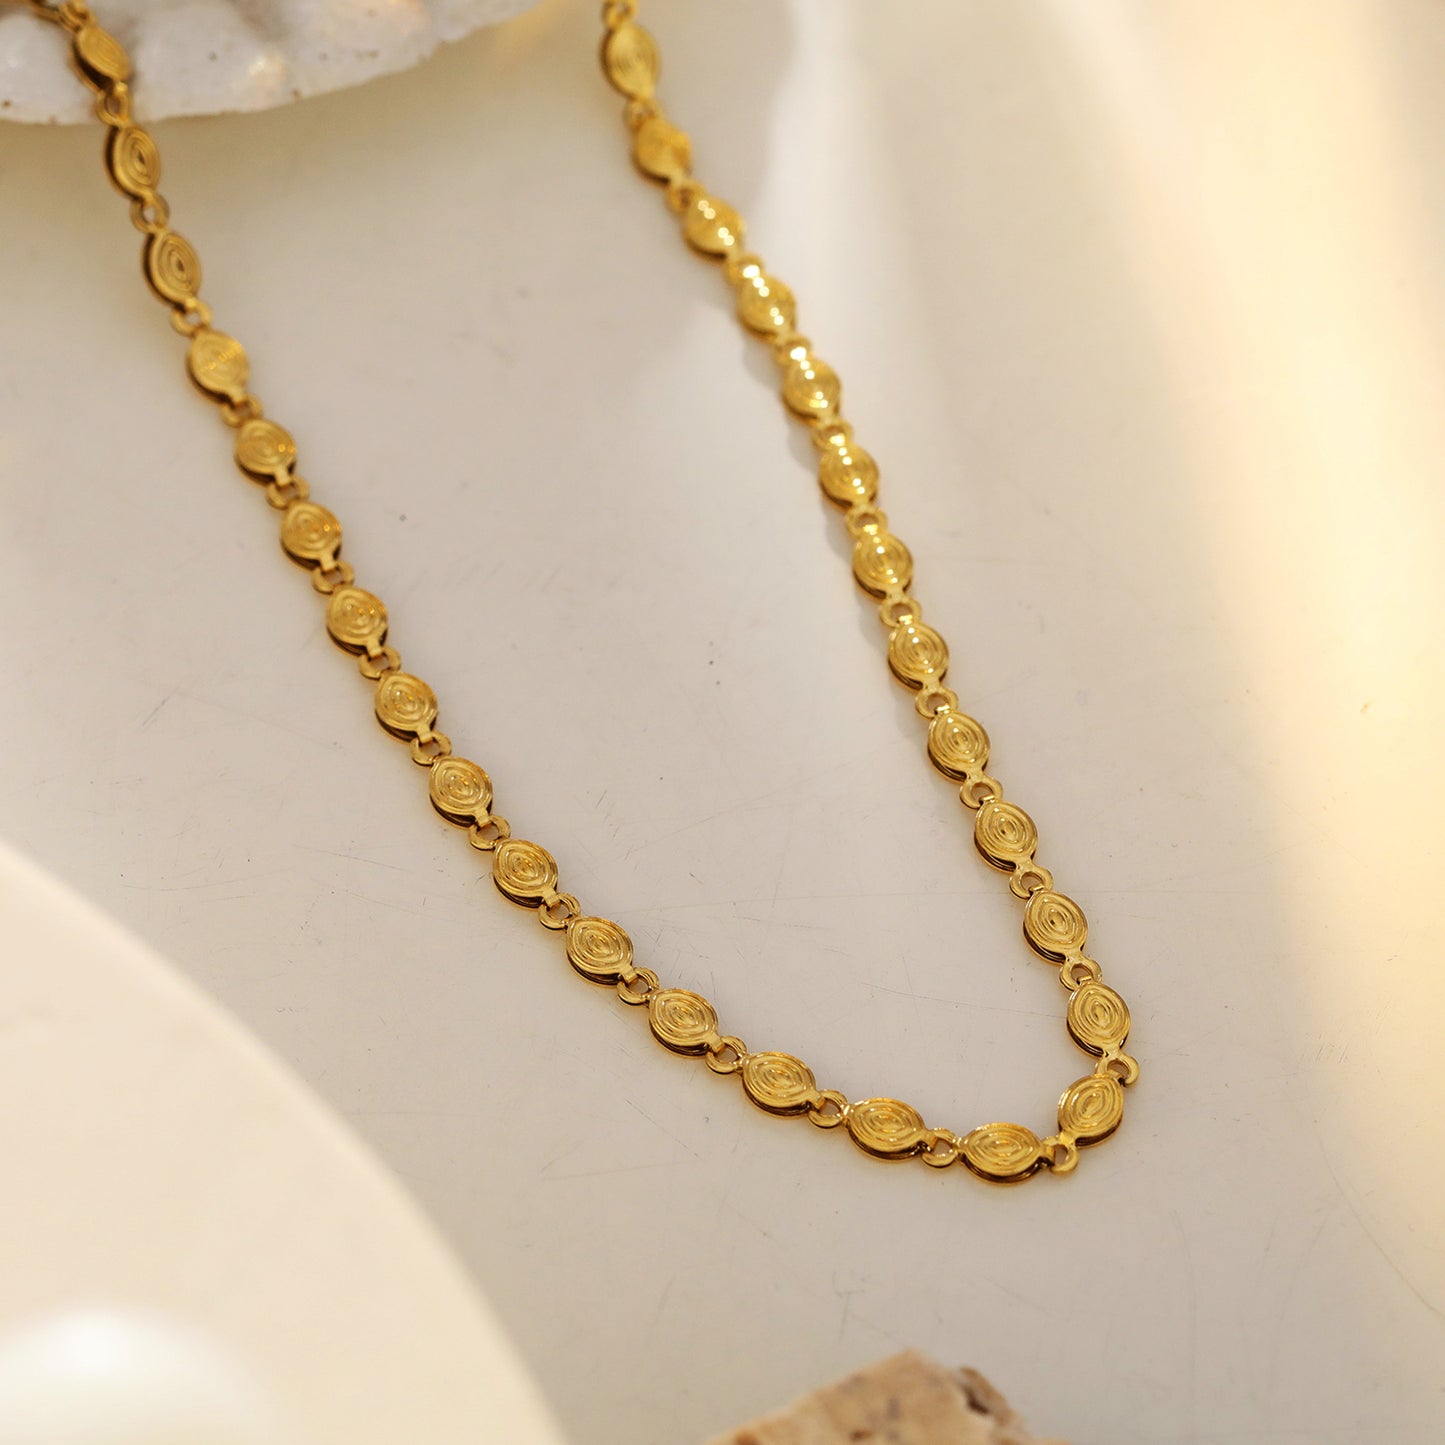 Style ANTHEA 85590: Patterned Oval Beaded Chain Necklace. | HACKNEY-NINE